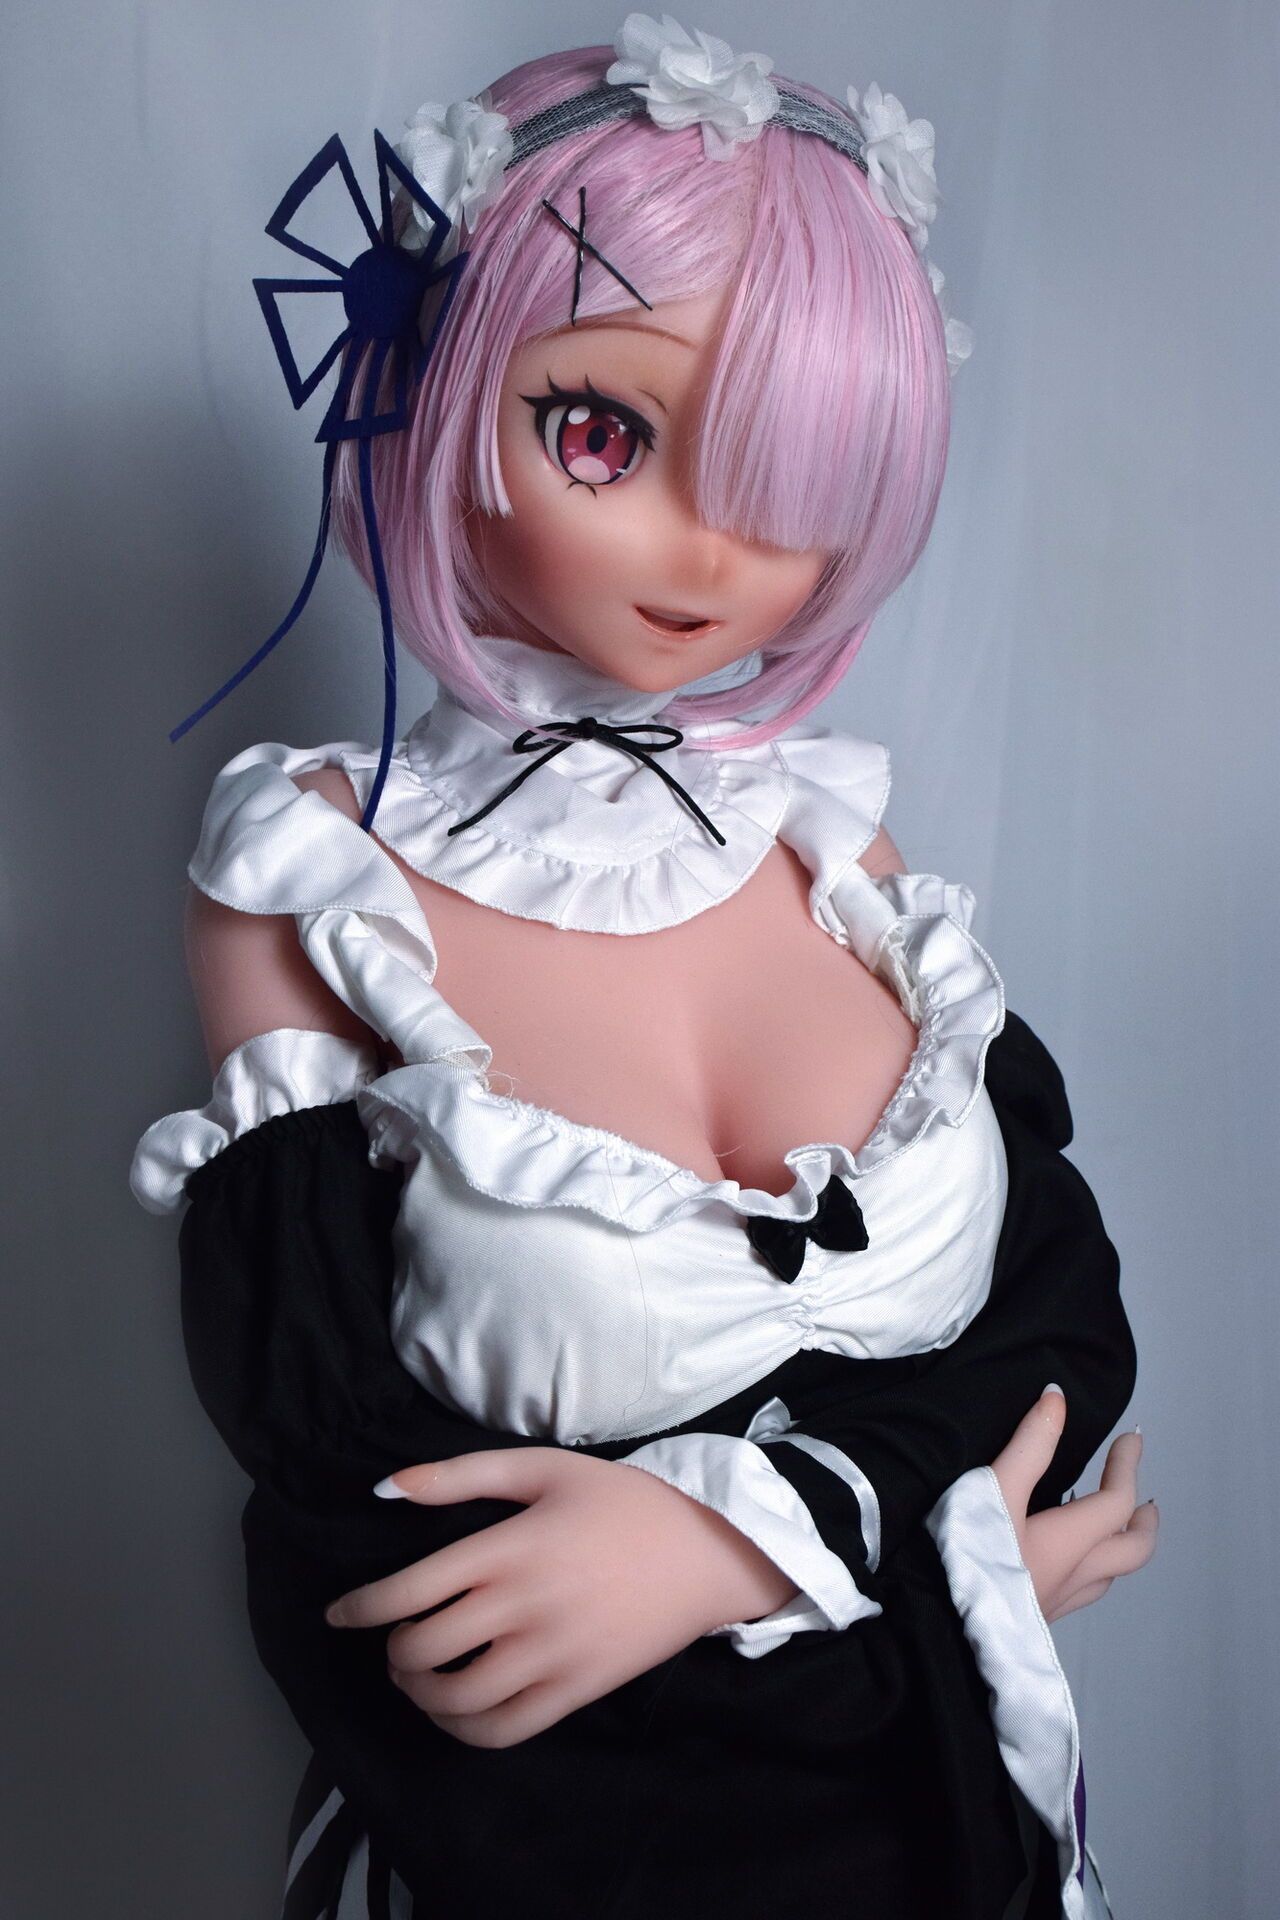 Elsa Babe [148CM AHR006 Mishima Miyo] 12% off the first launch of new doll! 2022.06.14 10